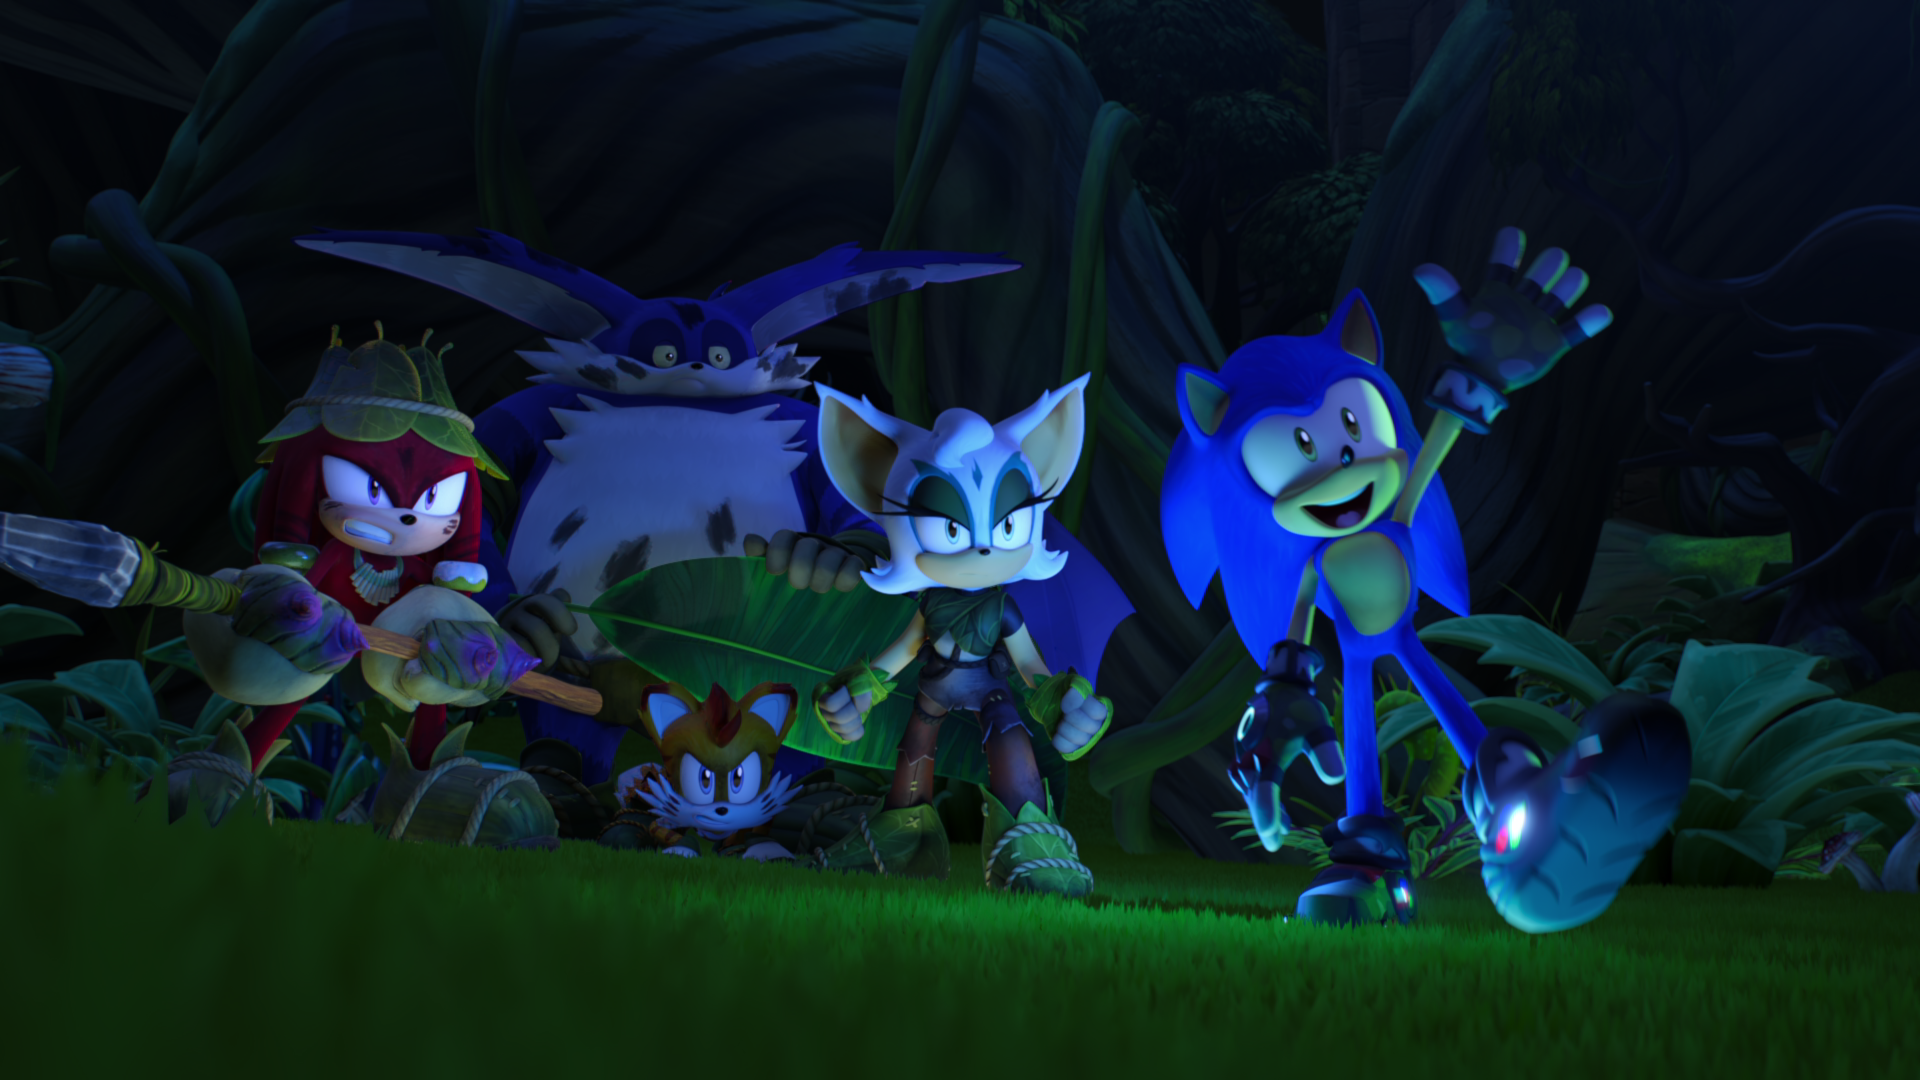 New Sonic Prime Images Reveal Shattered Takes on Iconic Sonic the